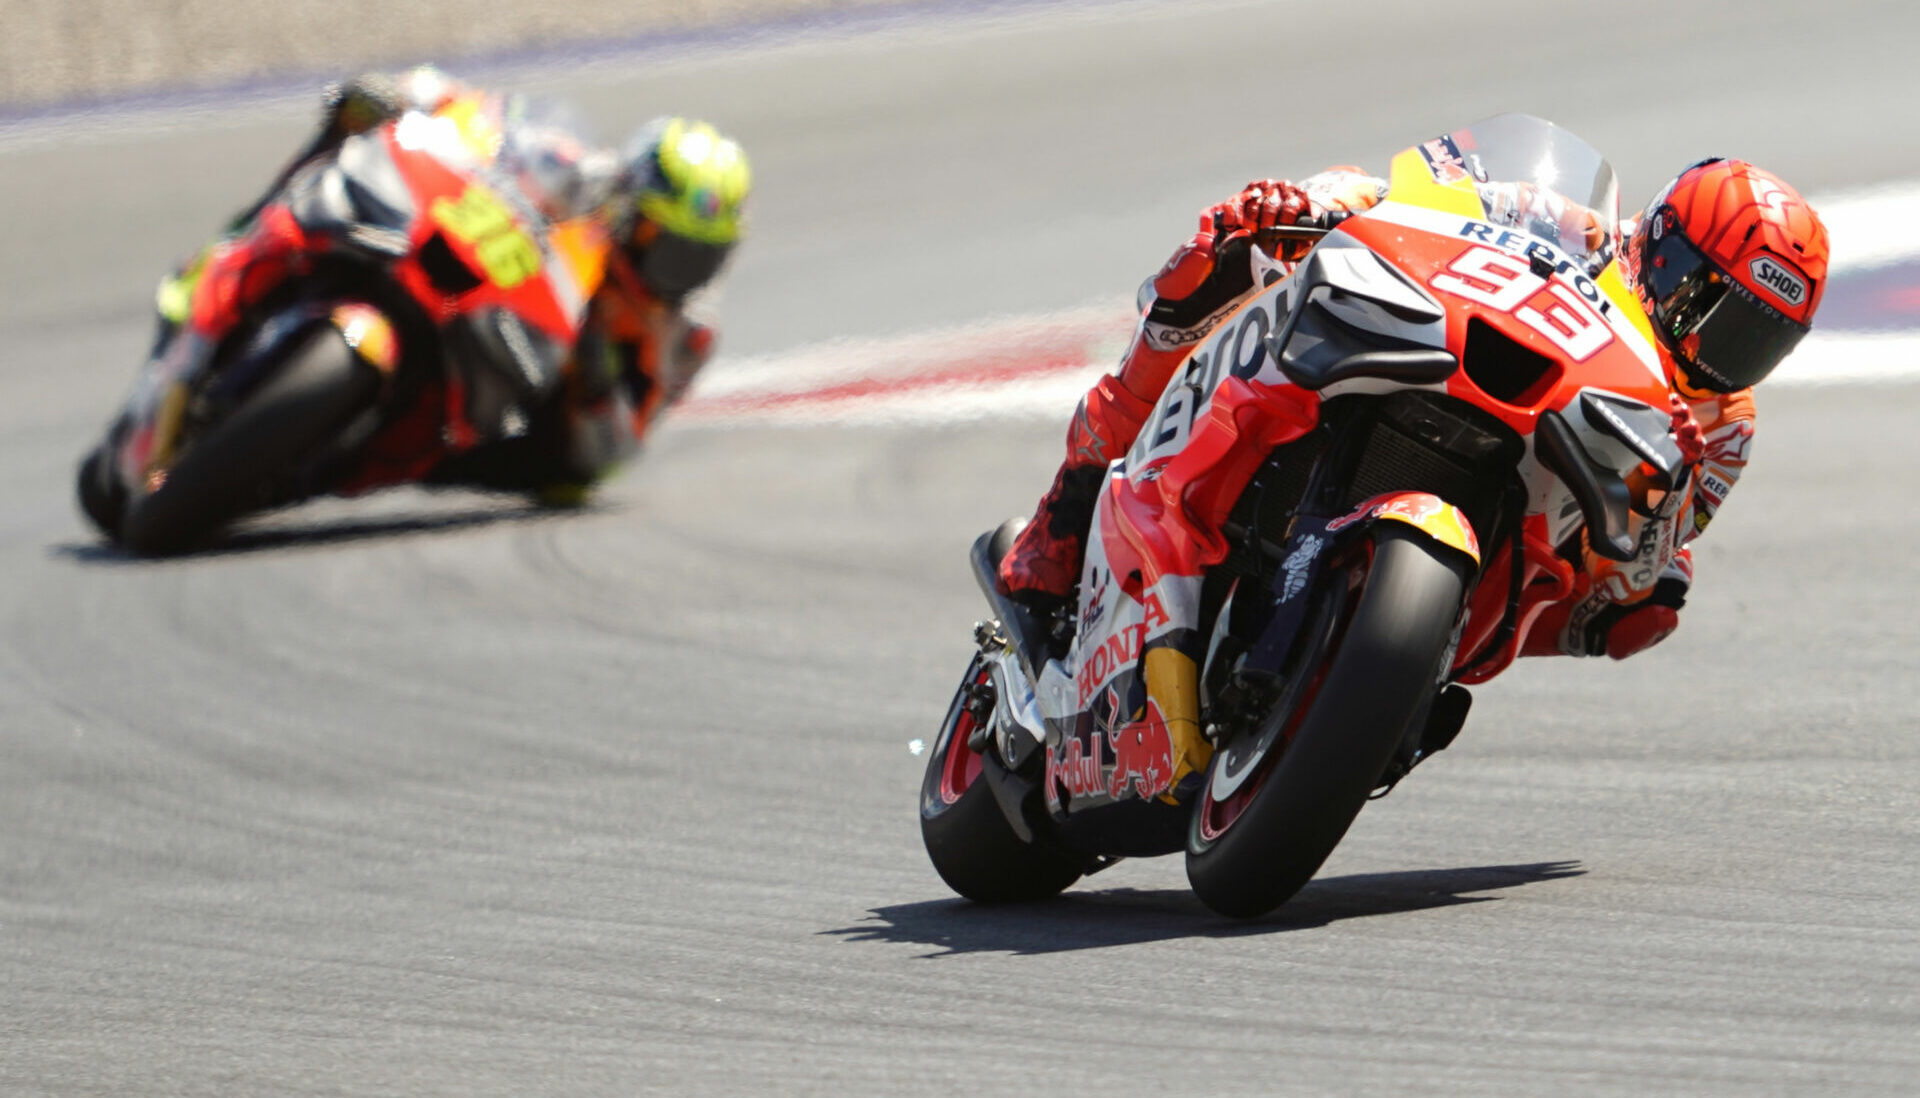 Marc Marquez (93) and Joan Mir (36) as seen at Red Bull Ring. Photo courtesy Repsol Honda.